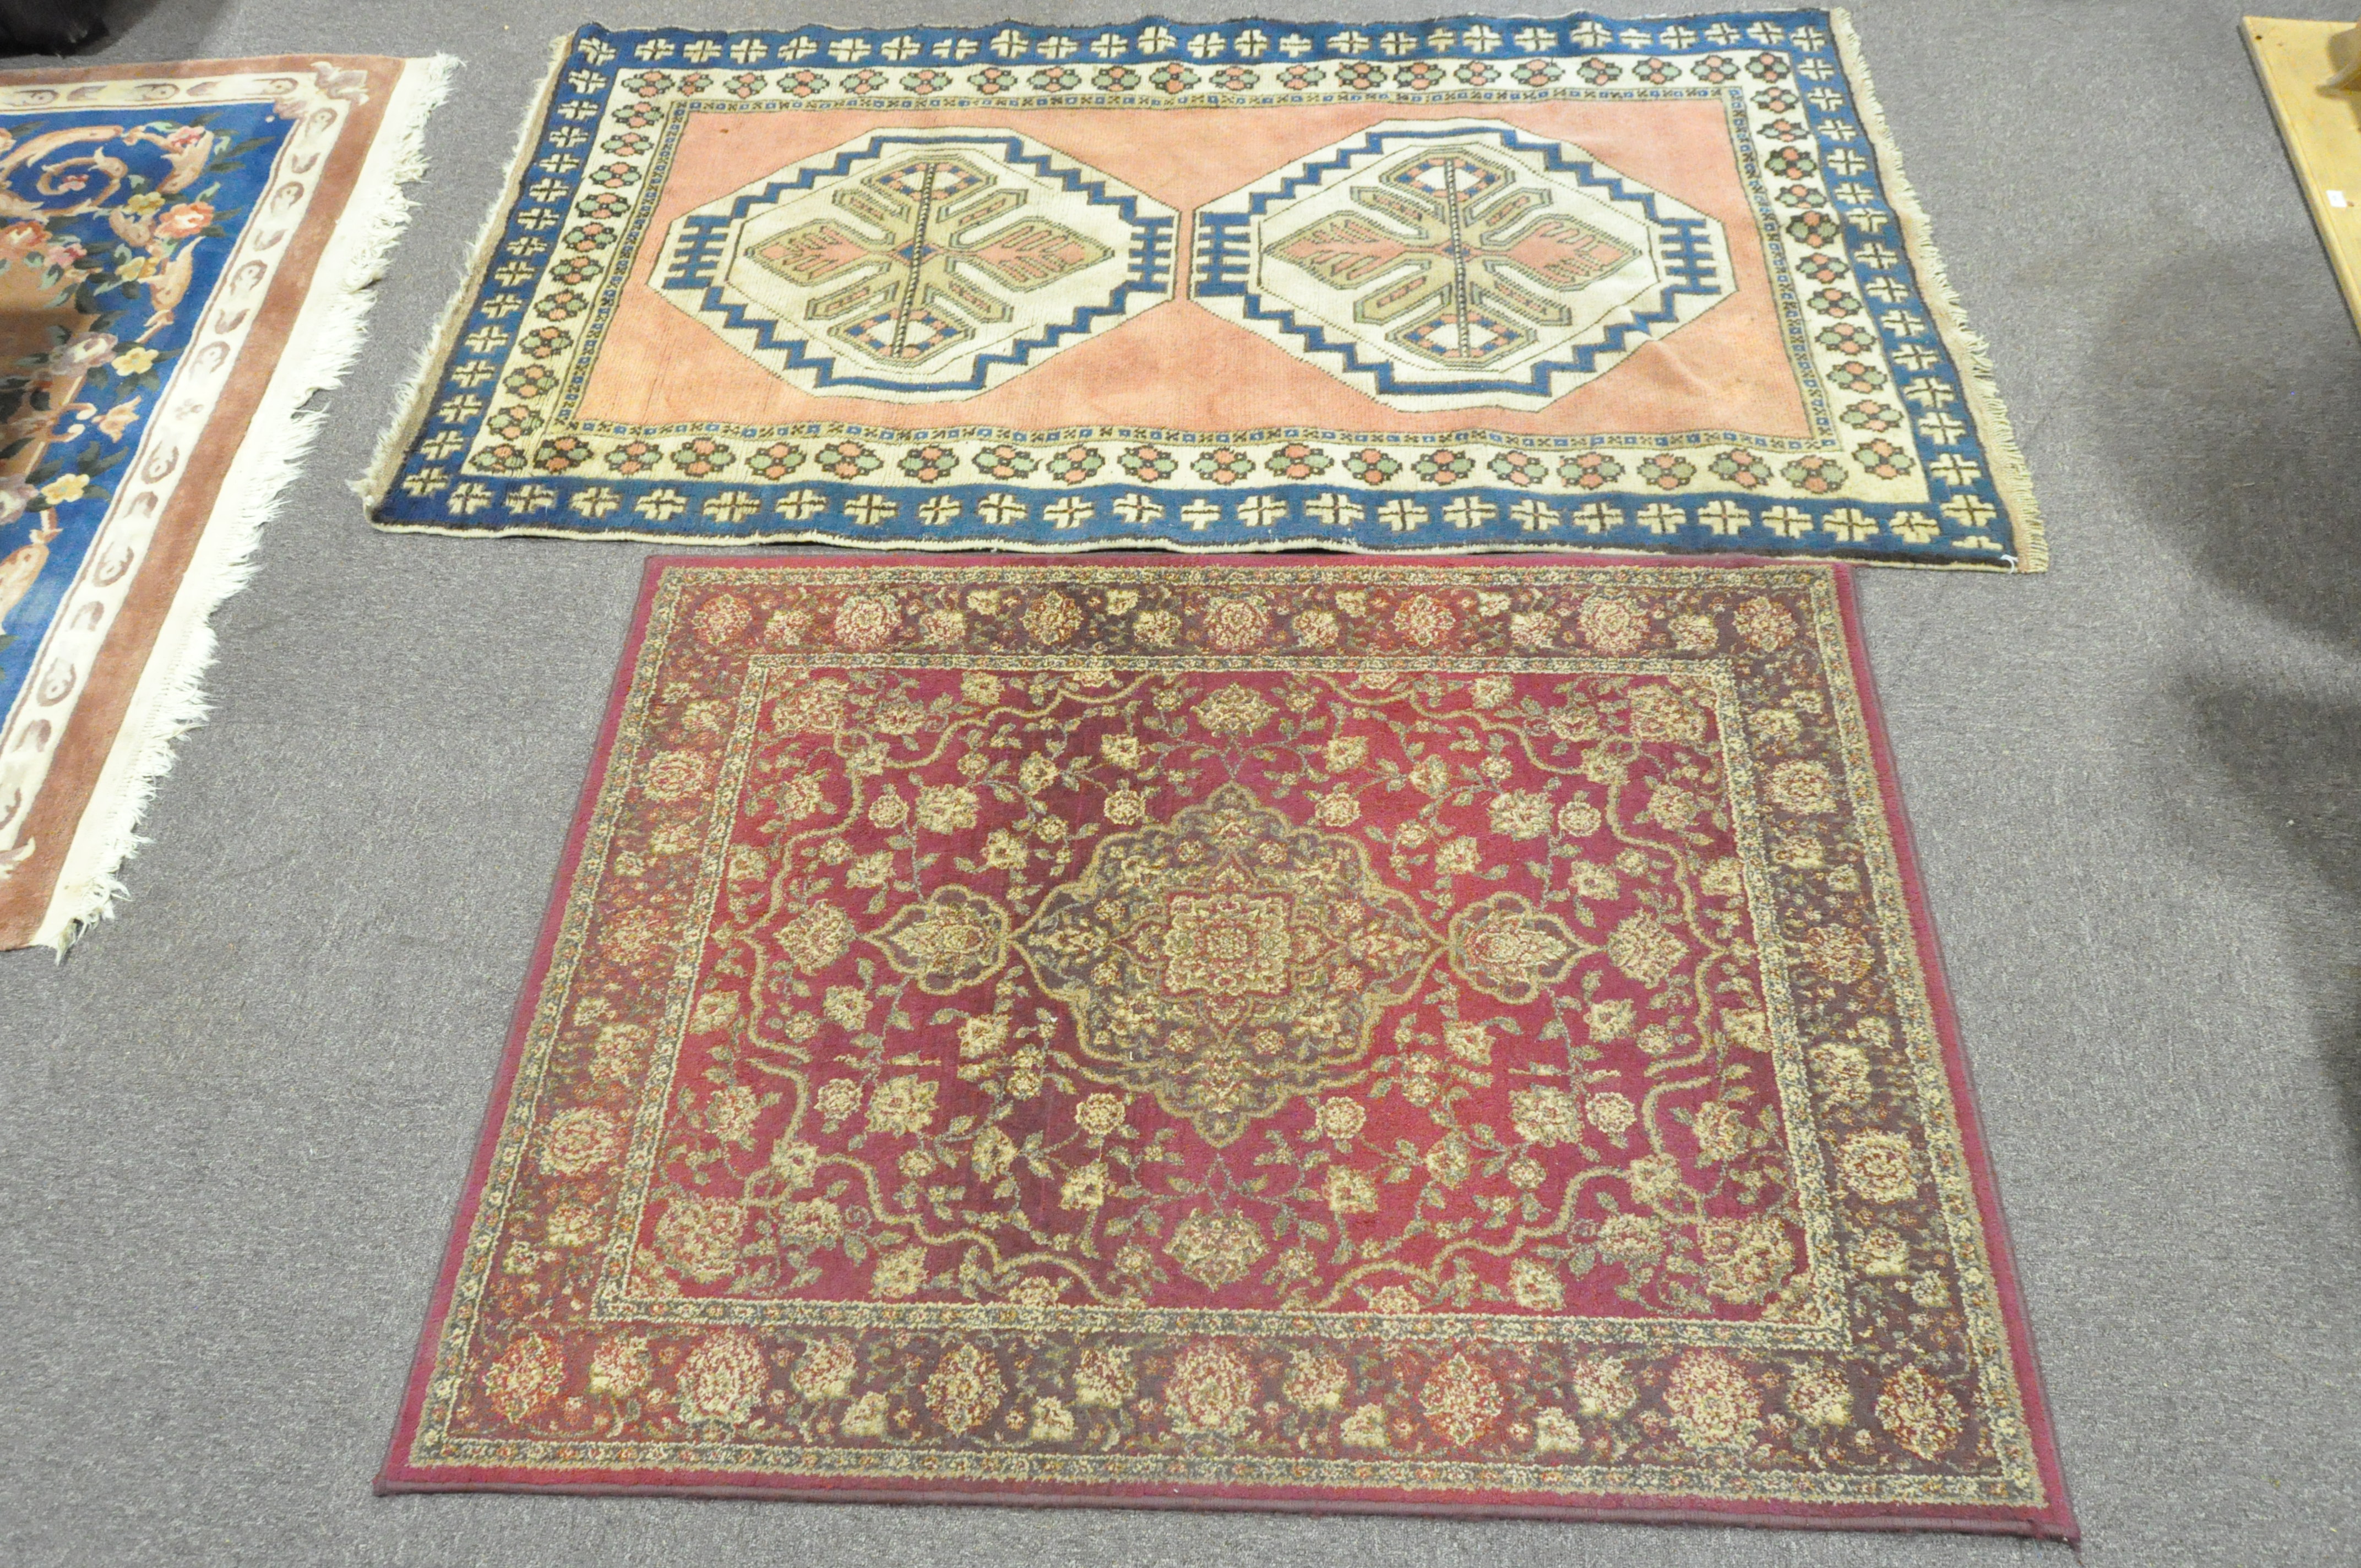 Two rugs, one a contemporary red ground rug,